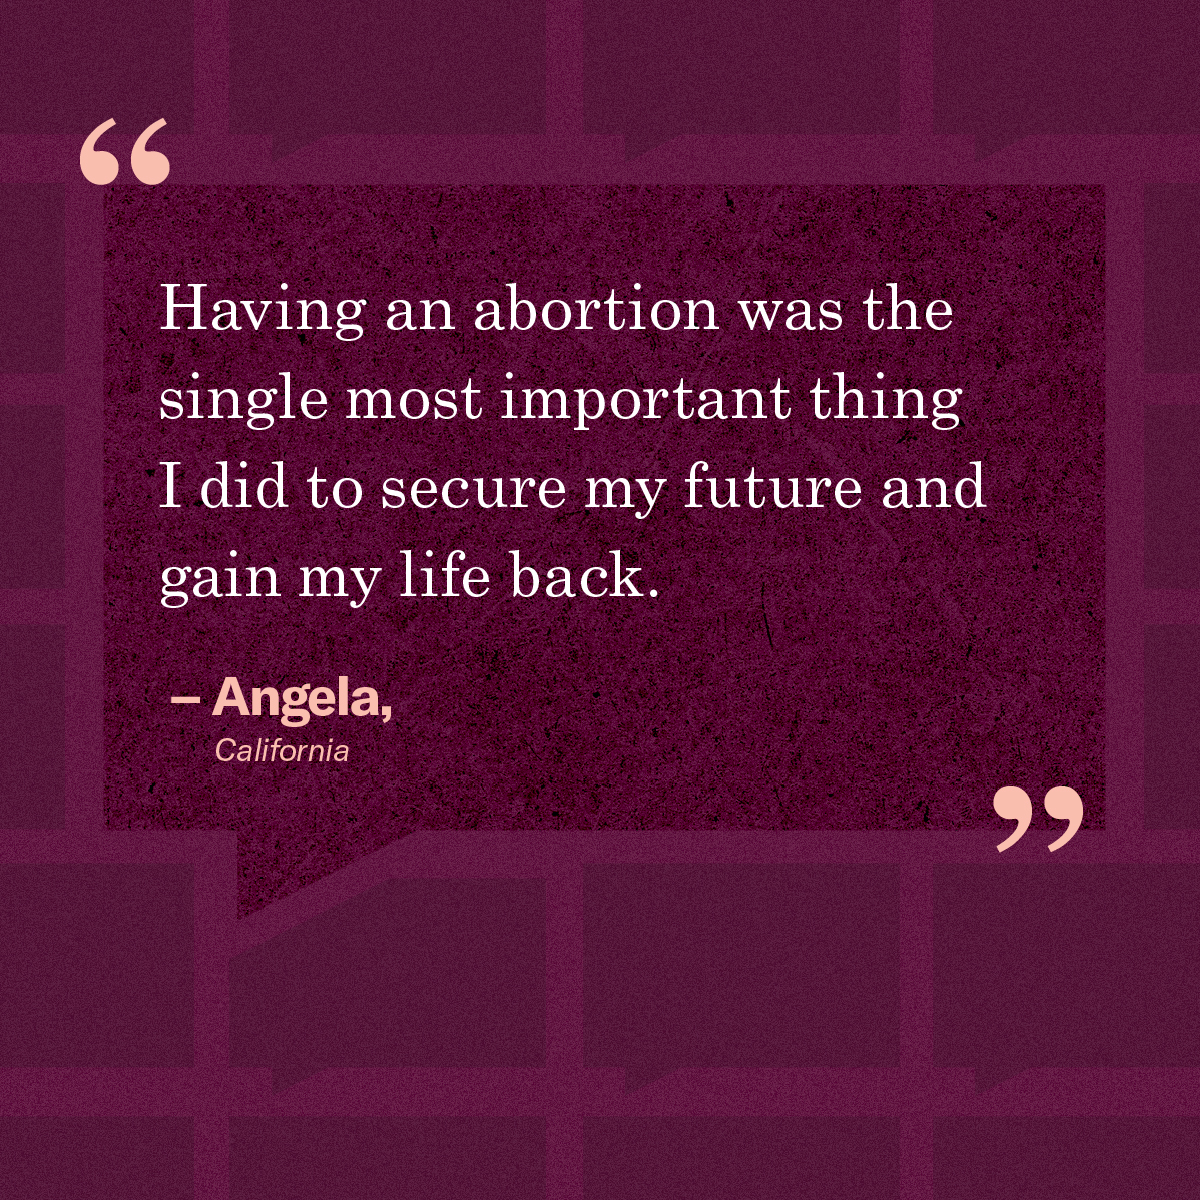 “Having an abortion was the single most important thing I did to secure my future and gain my life back.” – Angela, California